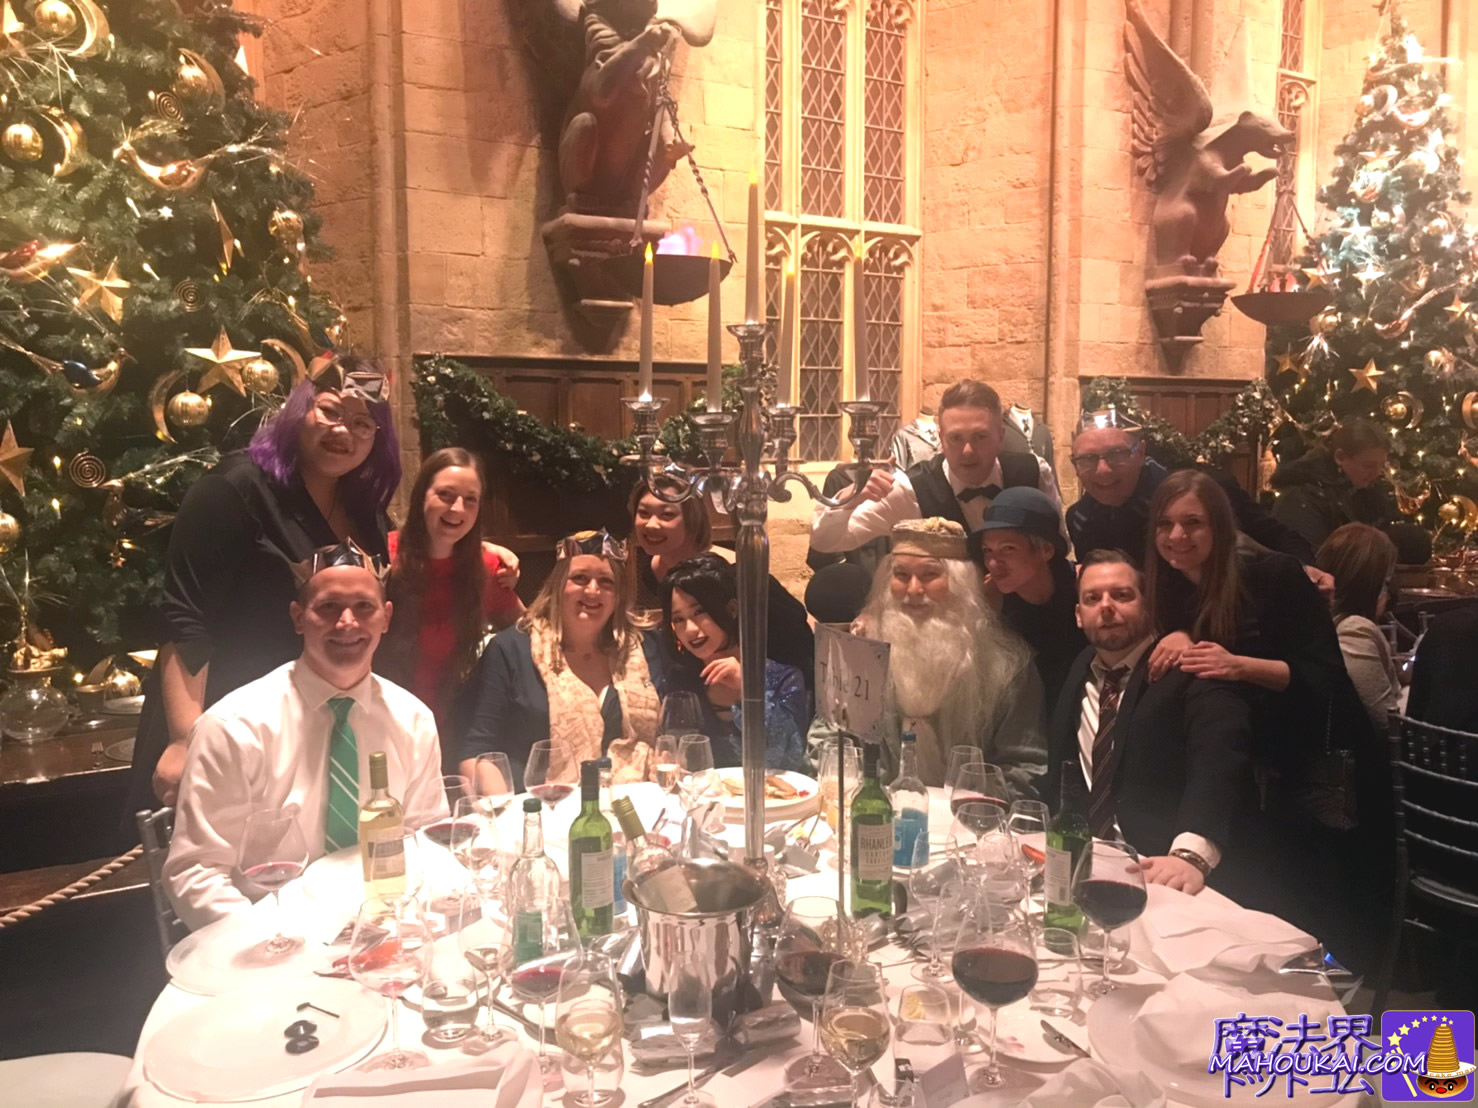 DINNER IN THE GREAT HALL 12/9/2019 Table NO 22 Harry POtter Friends ハリー・ポッター スタジオ ツアー ロンドン （イギリス）